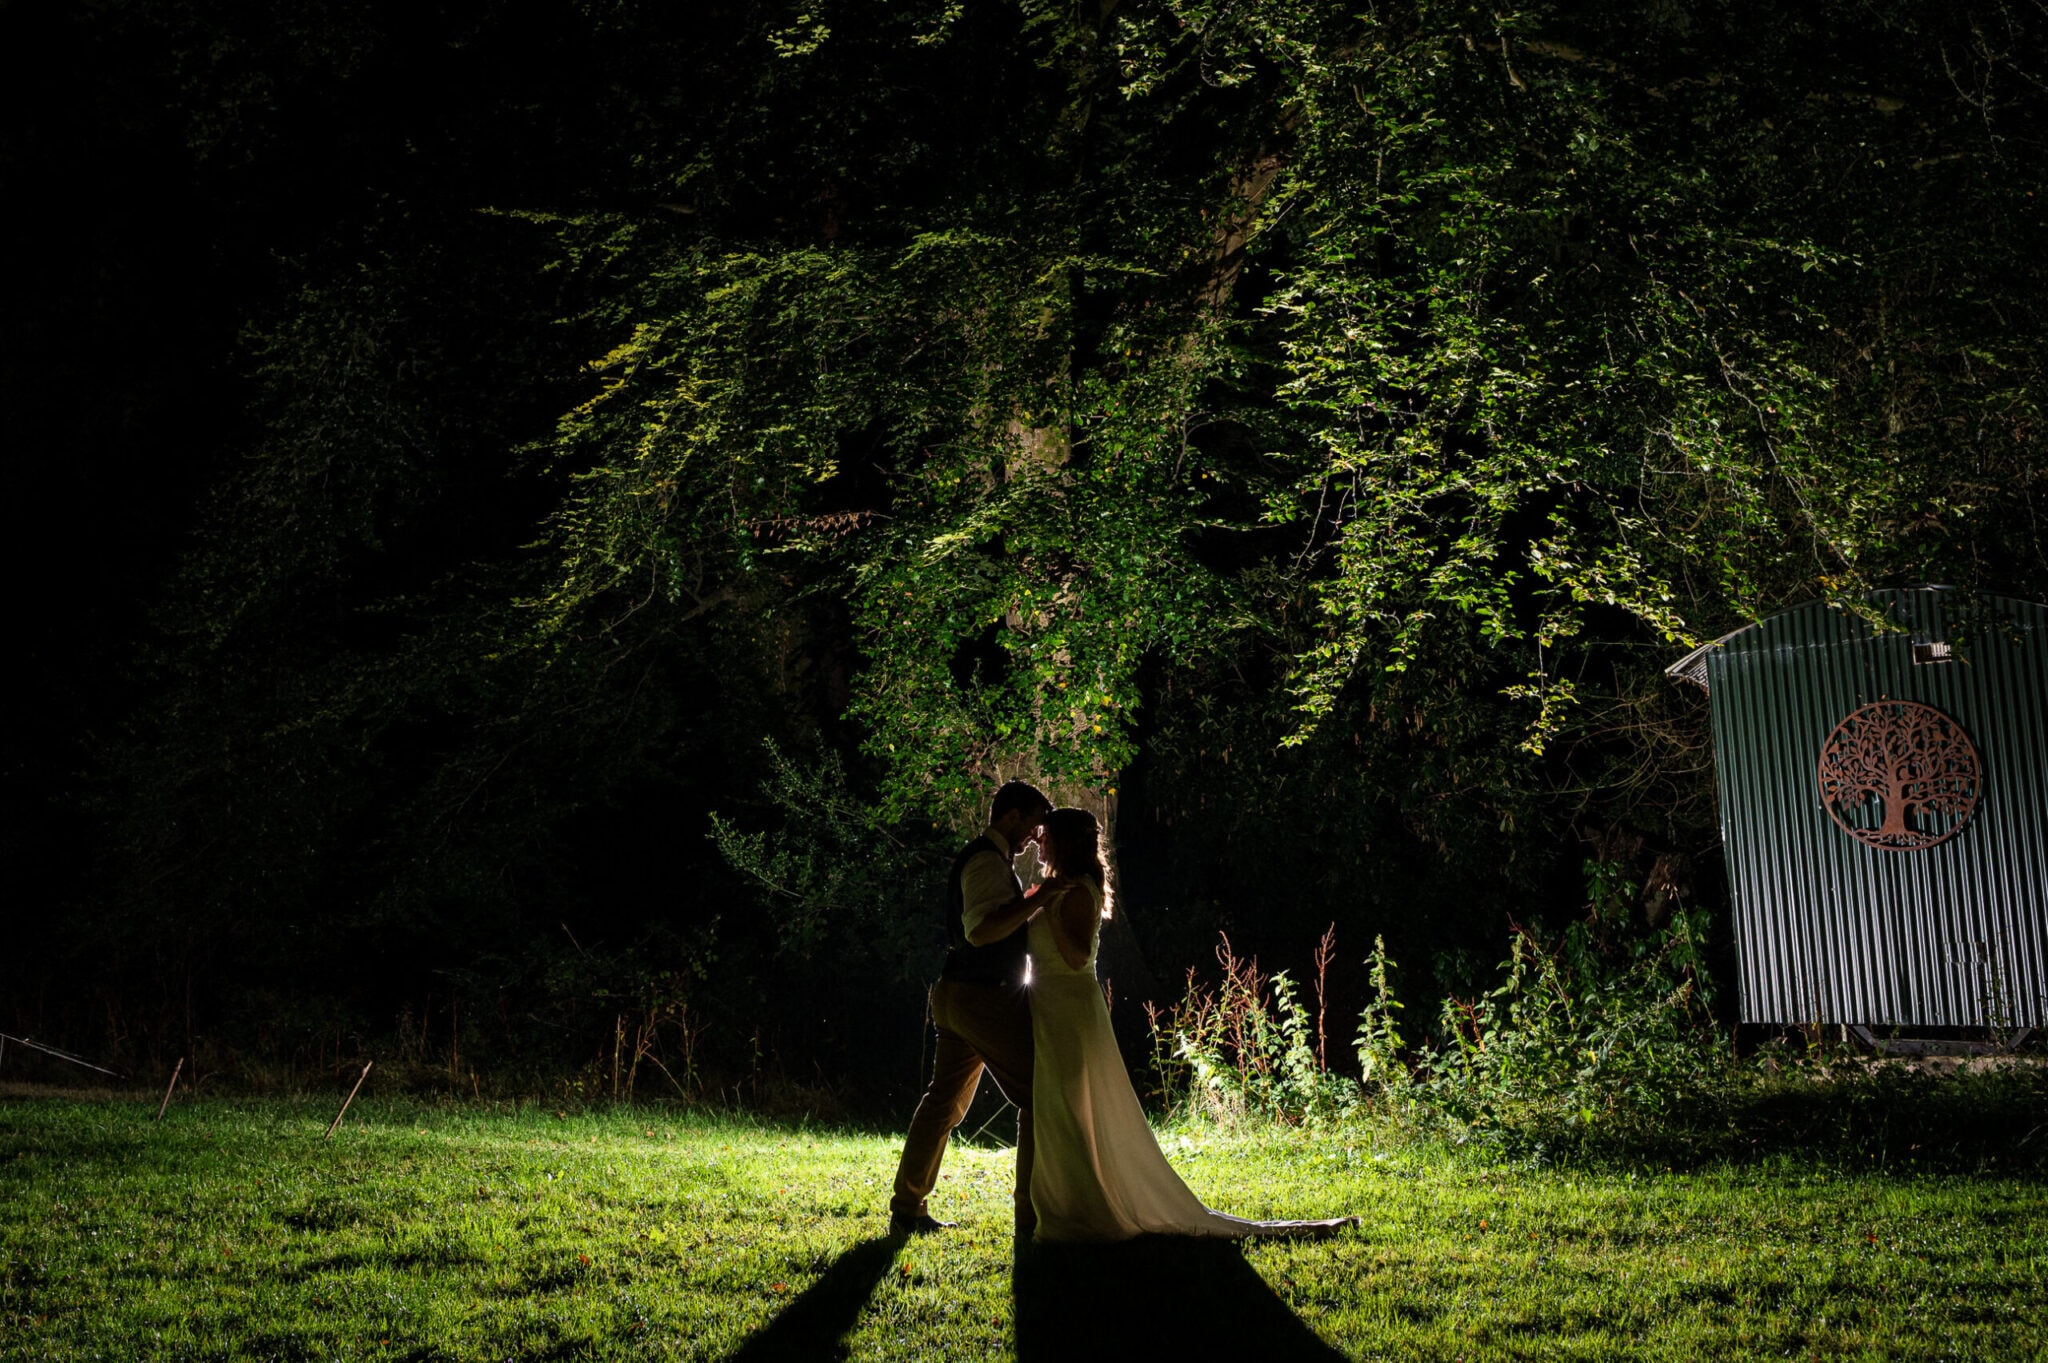 Night time photography at Weddings in the Wood near Burley in the New Forest